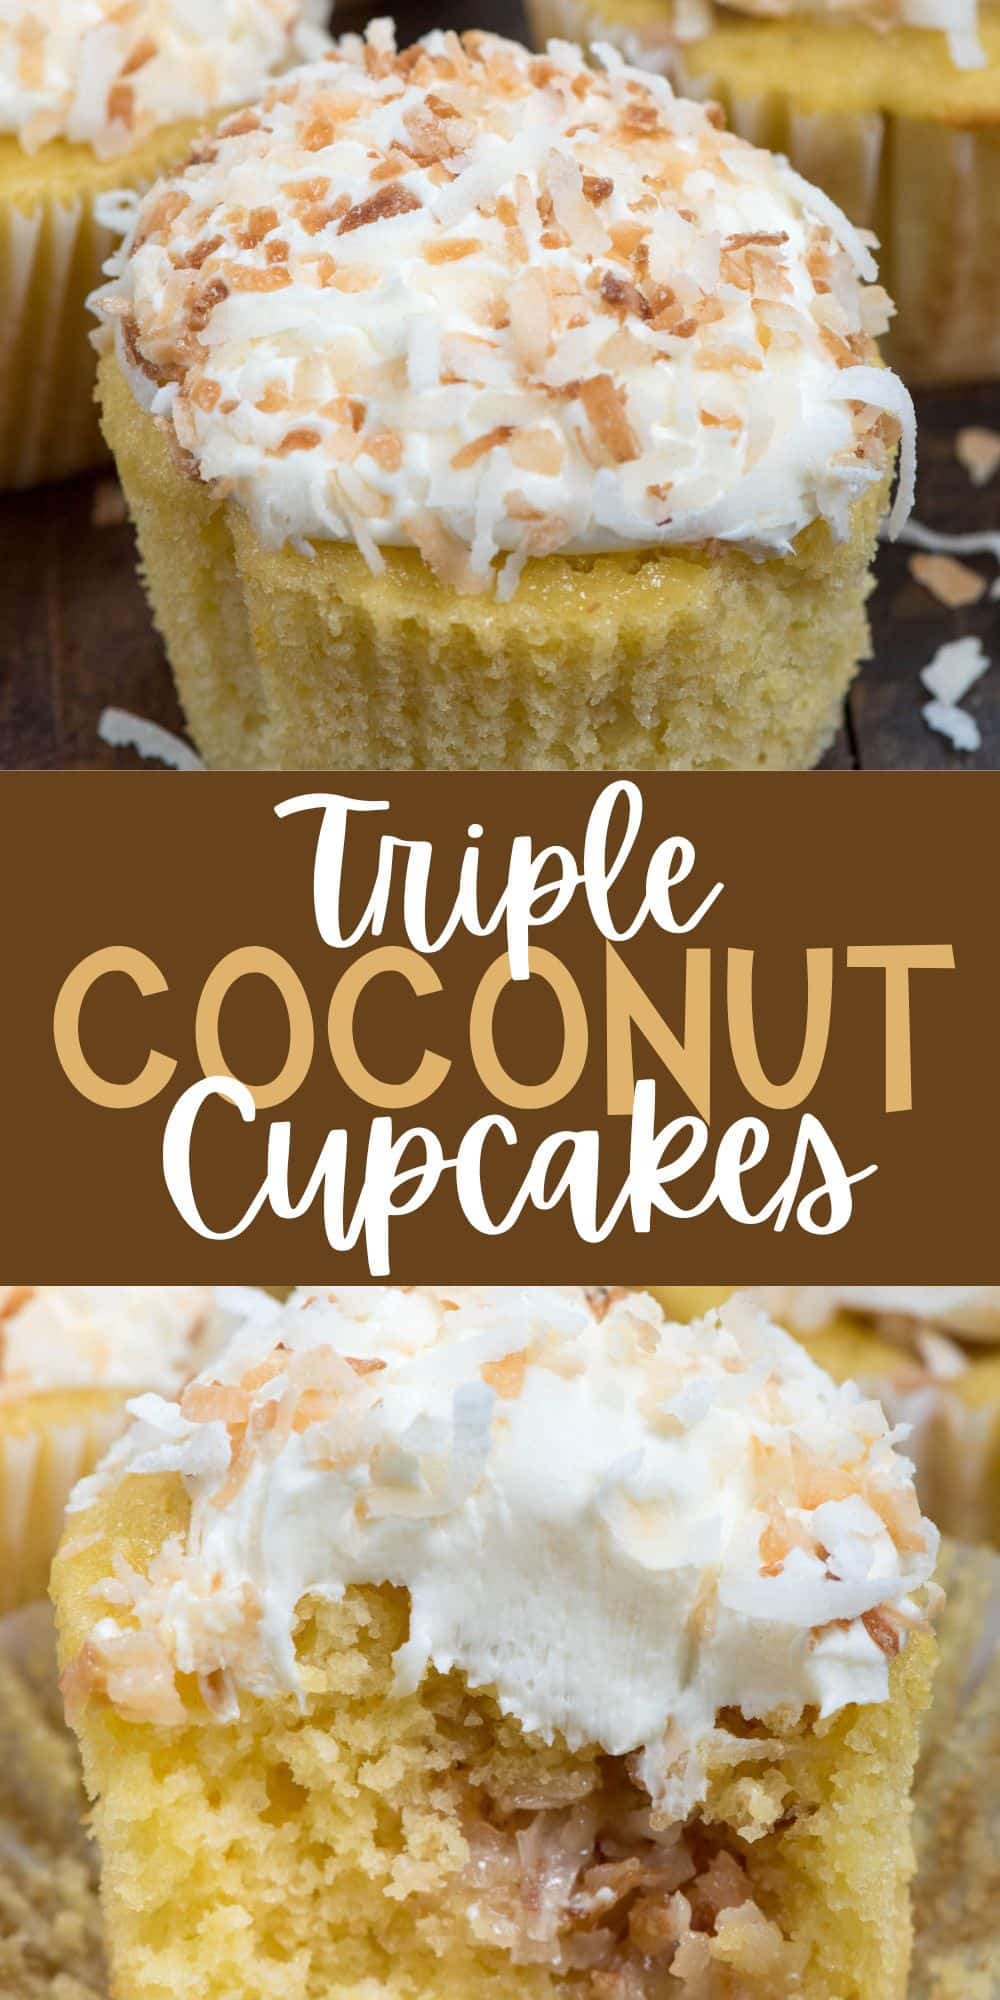 two photos of yellow cupcakes with white frosting topped with coconut with words on the image.